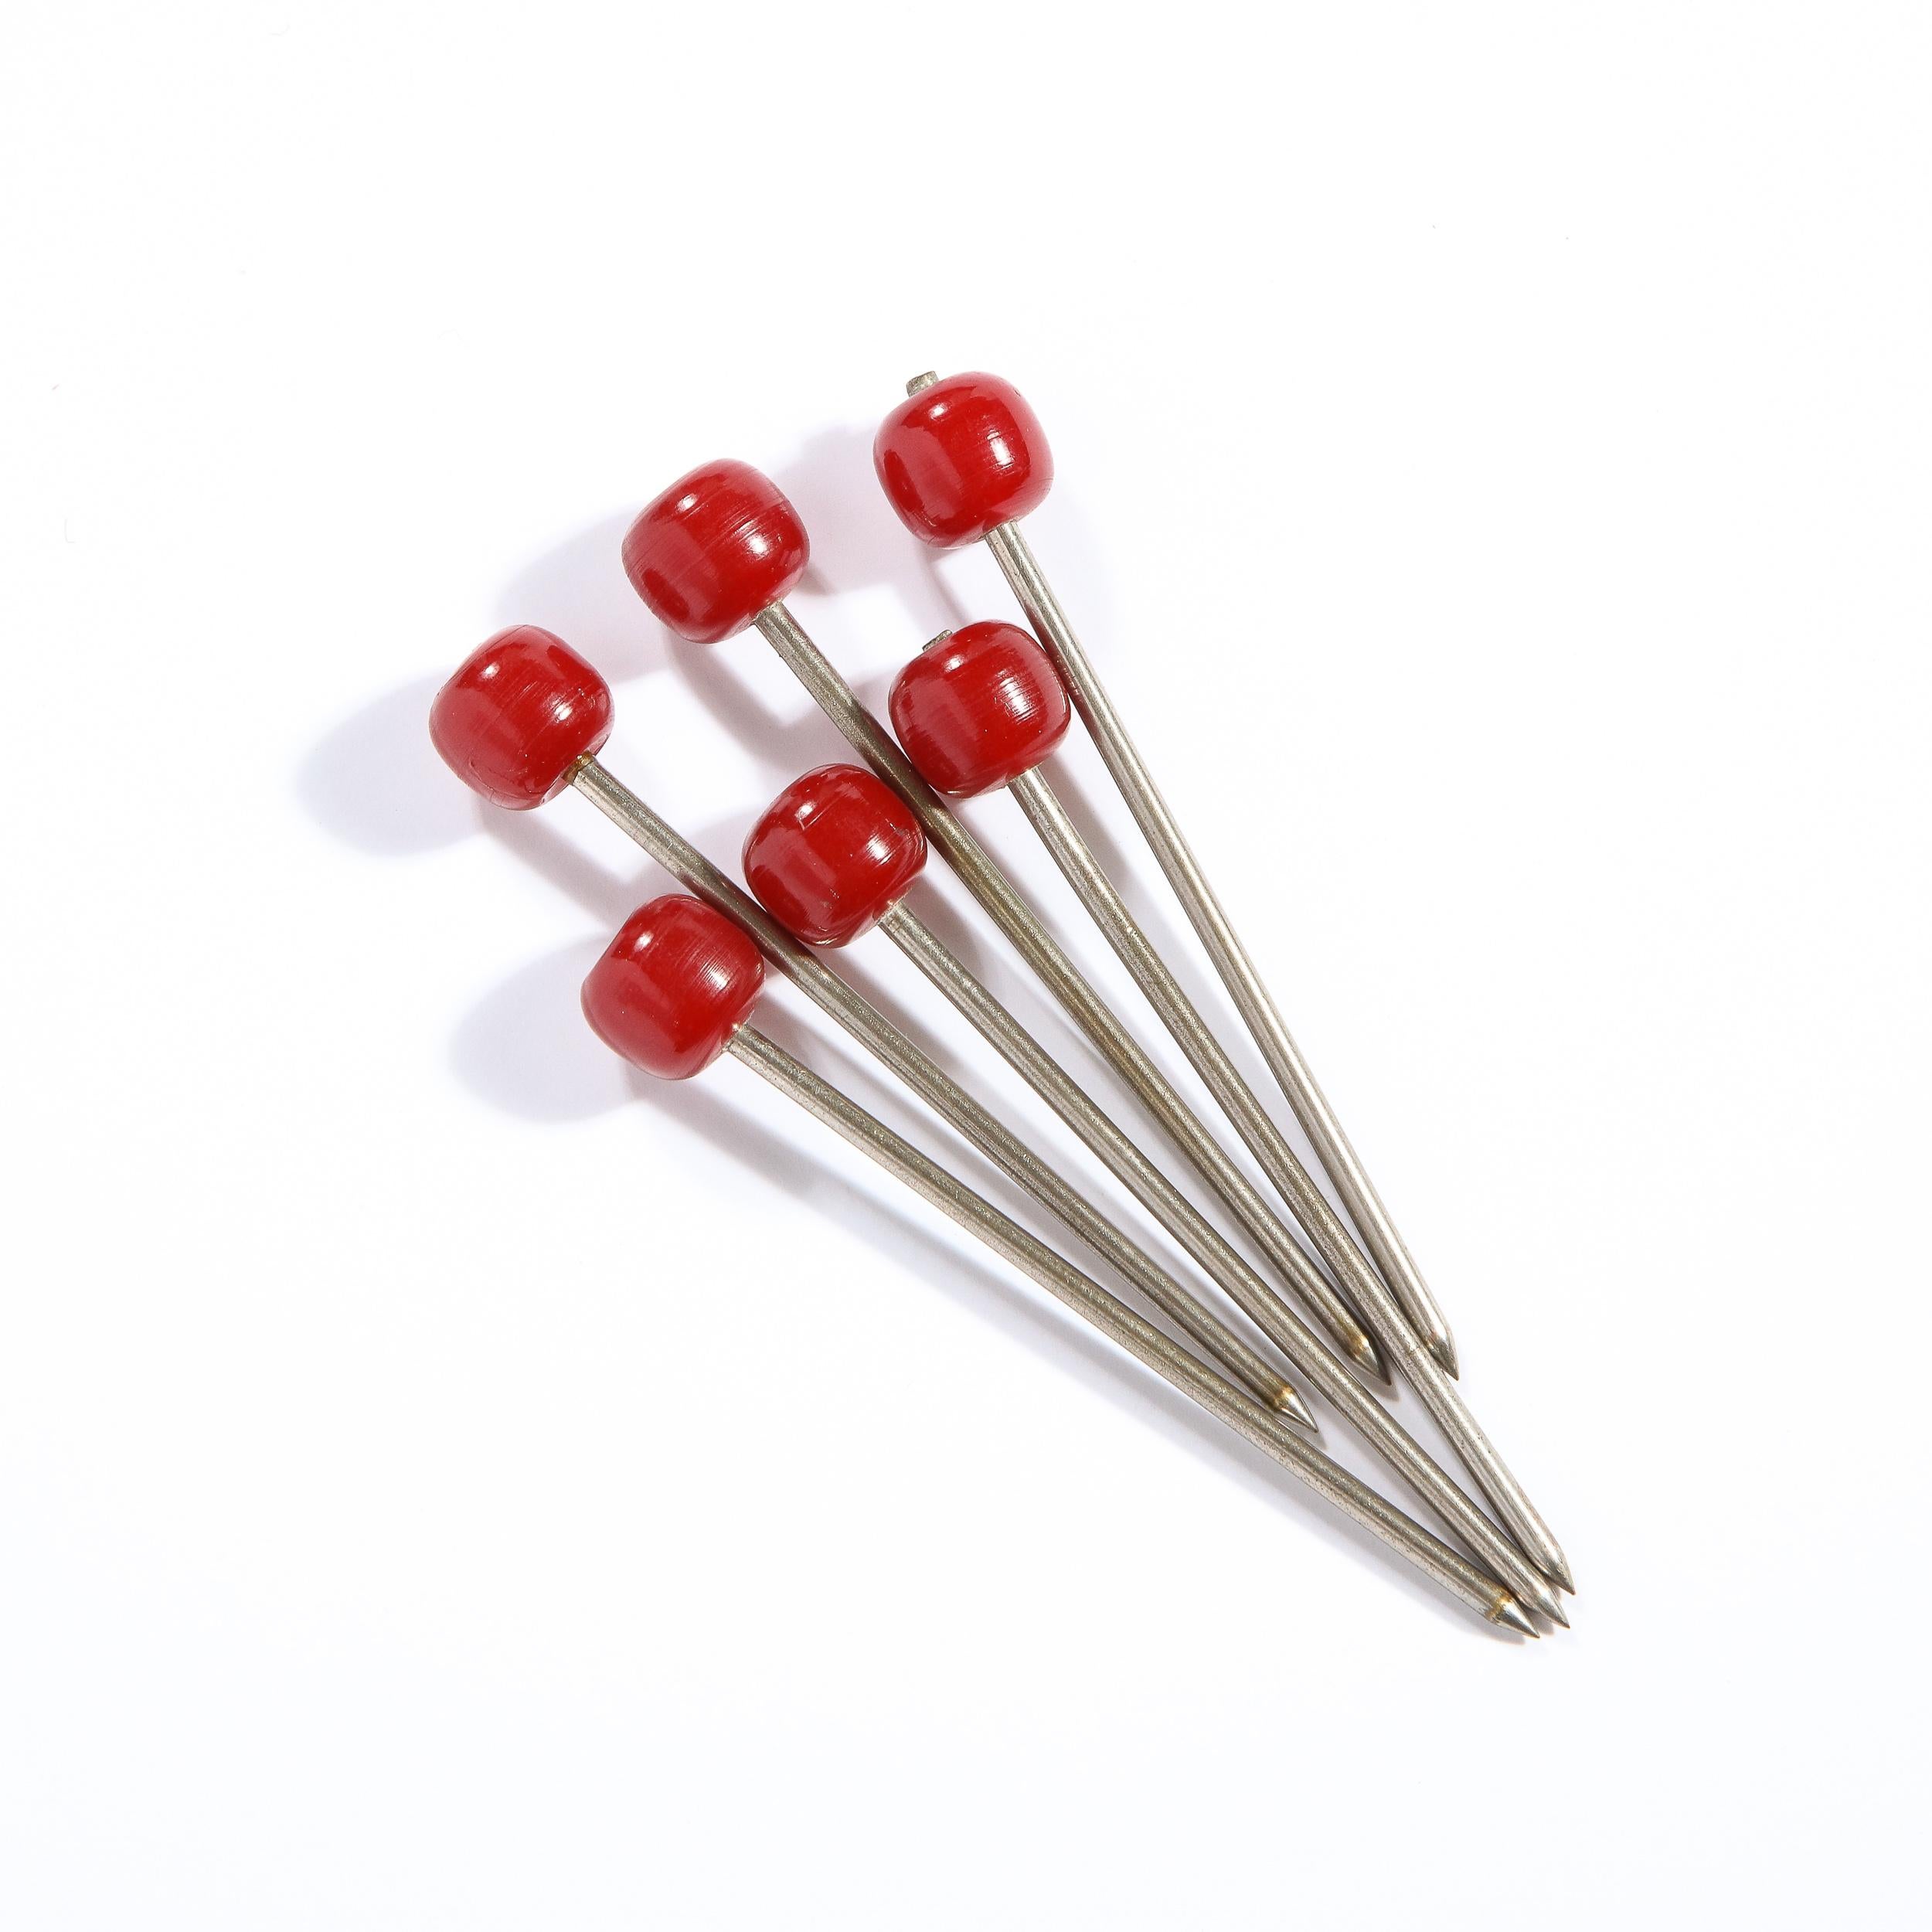 This refined set of six cocktail picks were realized in the United States, circa 1930. It features an orbital end in carnelian bakelite that attaches to a cylindrical stainless steel rod with a pointed end- ideal for spearing olives (or pearl onions